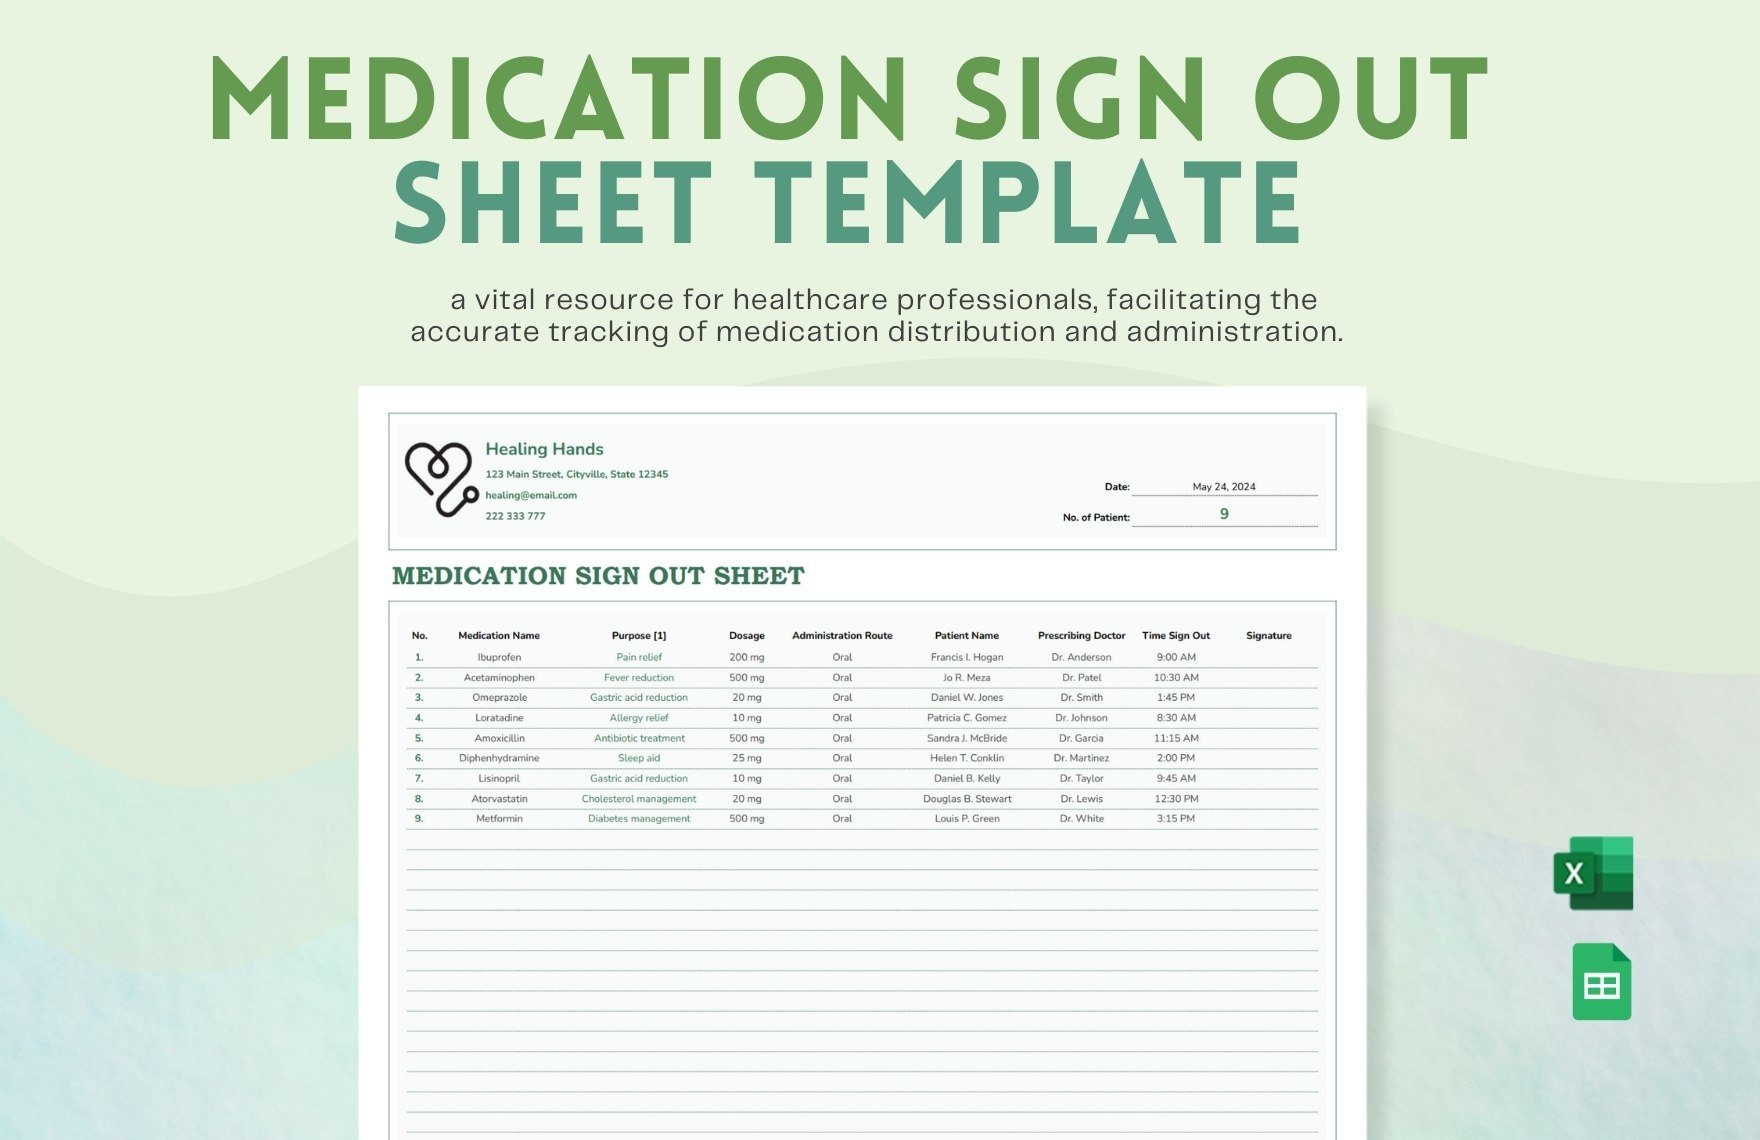 Medication Sign Out Sheet Template in Excel, Google Sheets